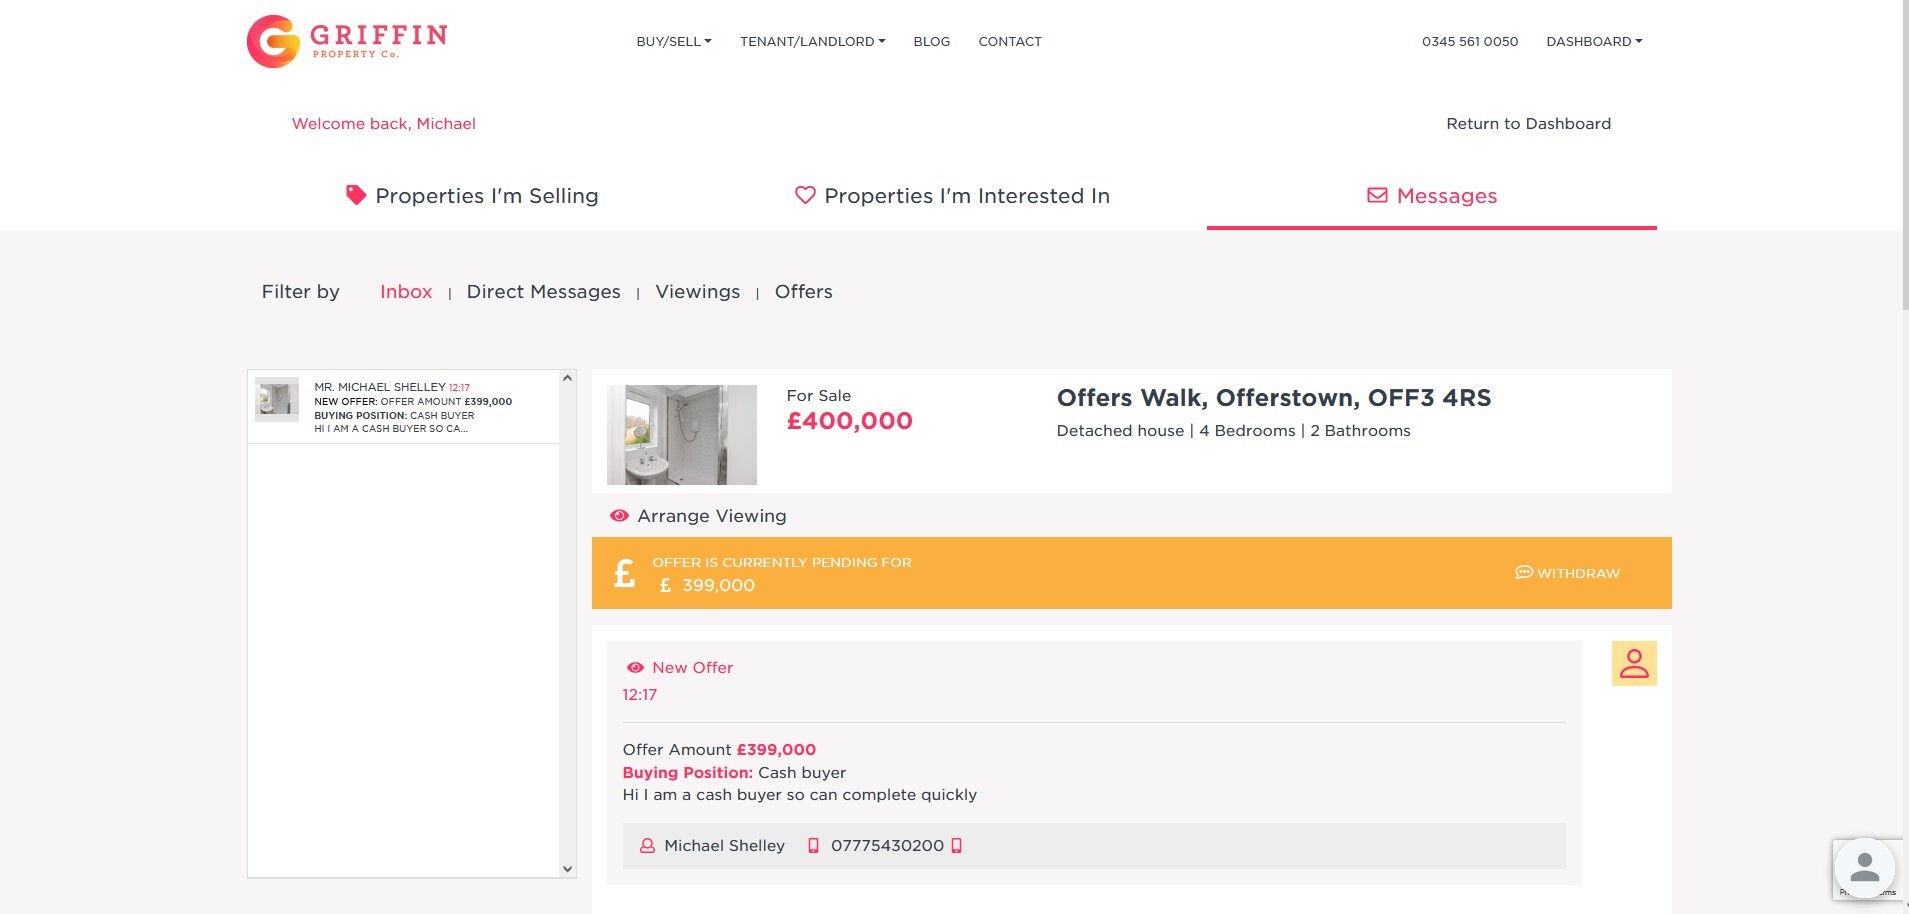 How to Manage Offers on the Griffin Property Co Website